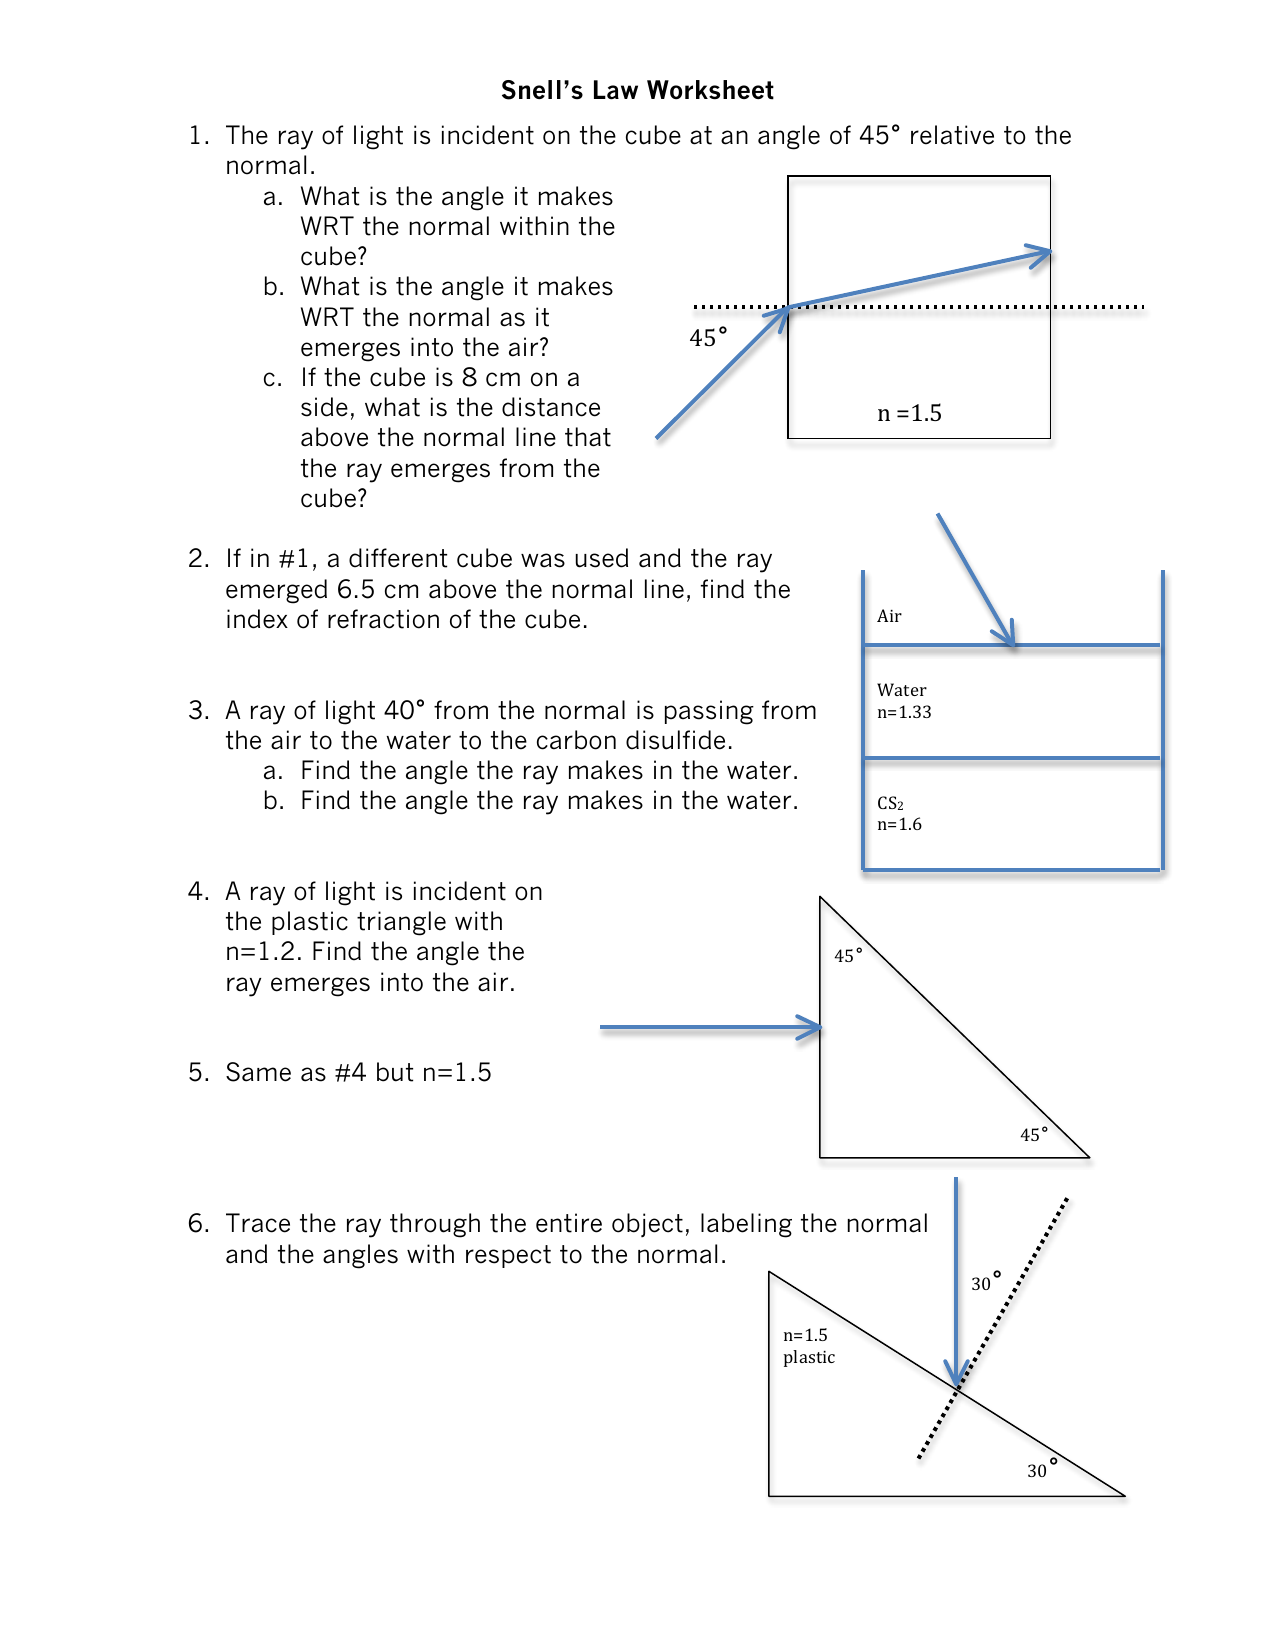 snell-s-law-worksheet-free-download-gambr-co